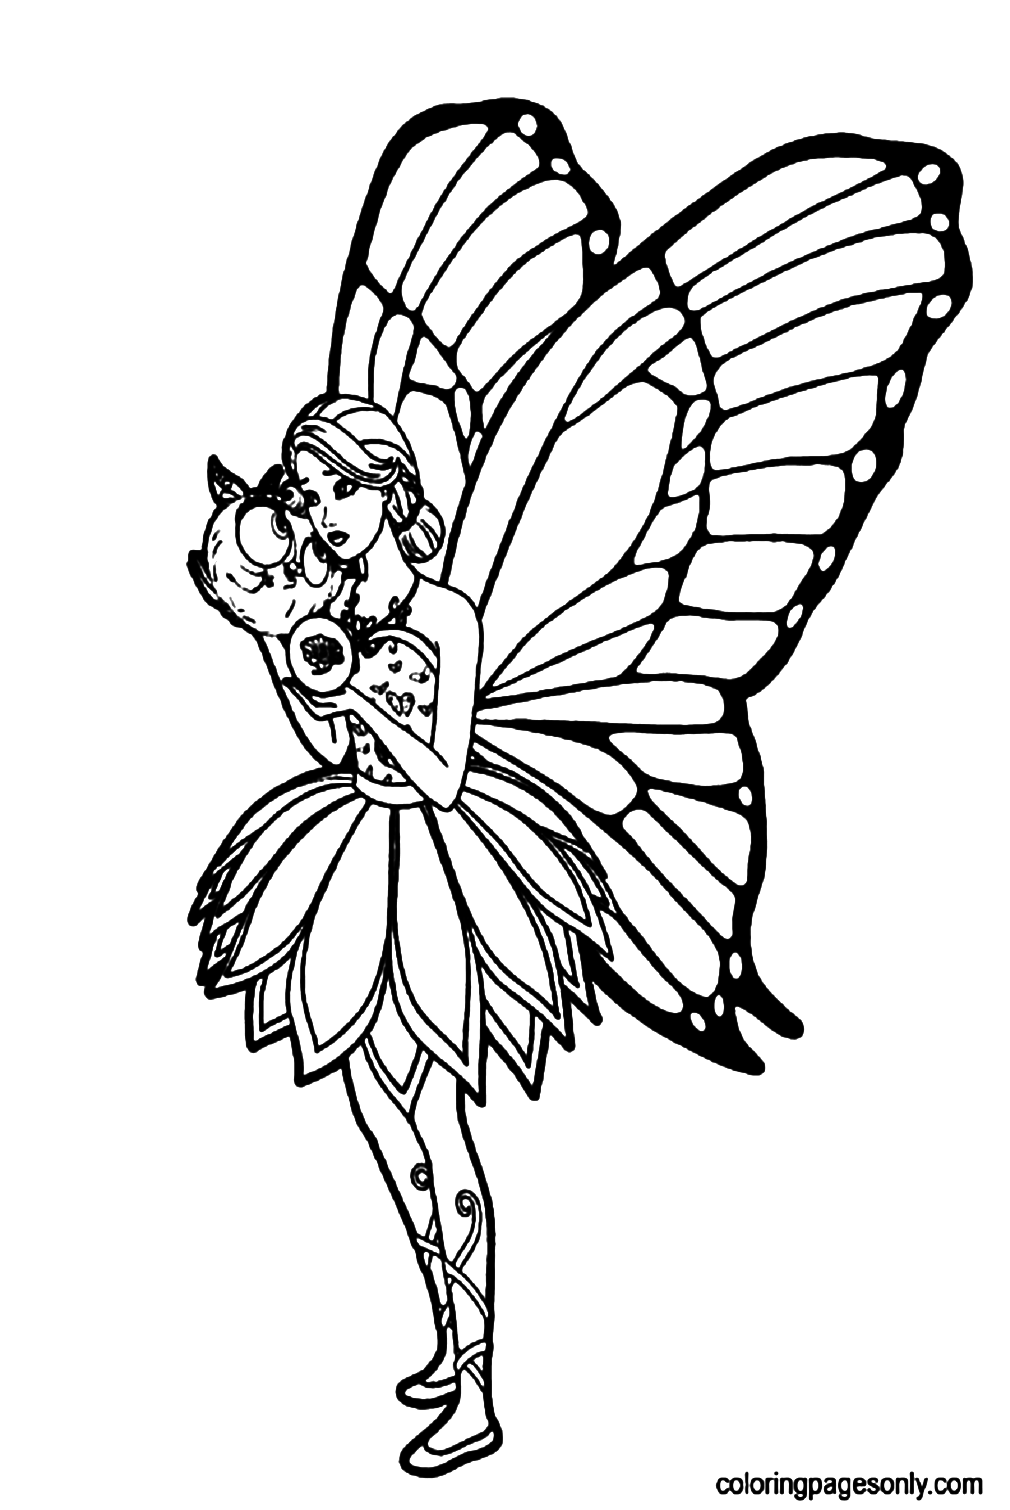 Barbie Fairy Coloring Page